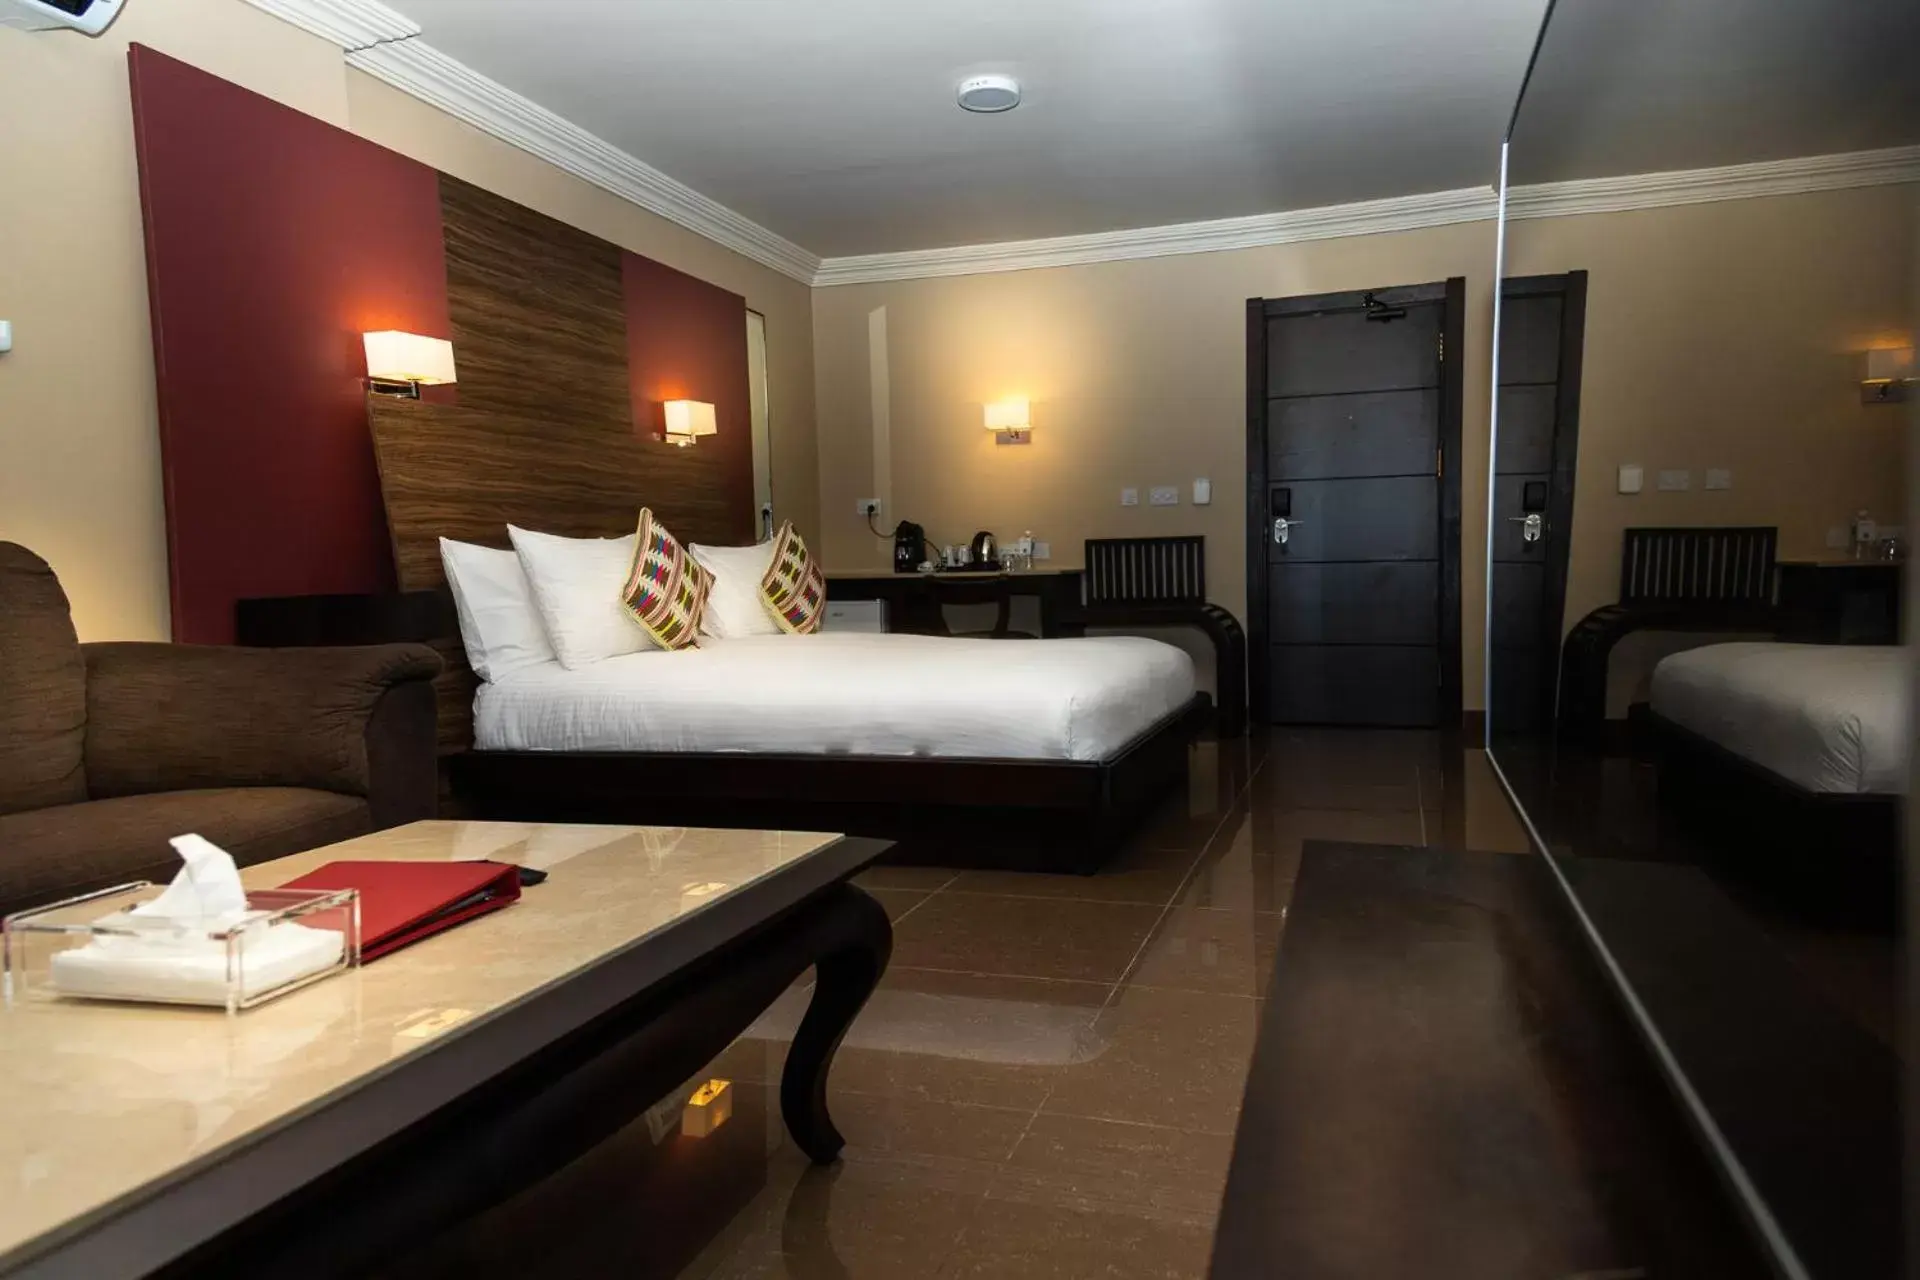 Executive Suite - single occupancy in Home Suites Boutique Hotel